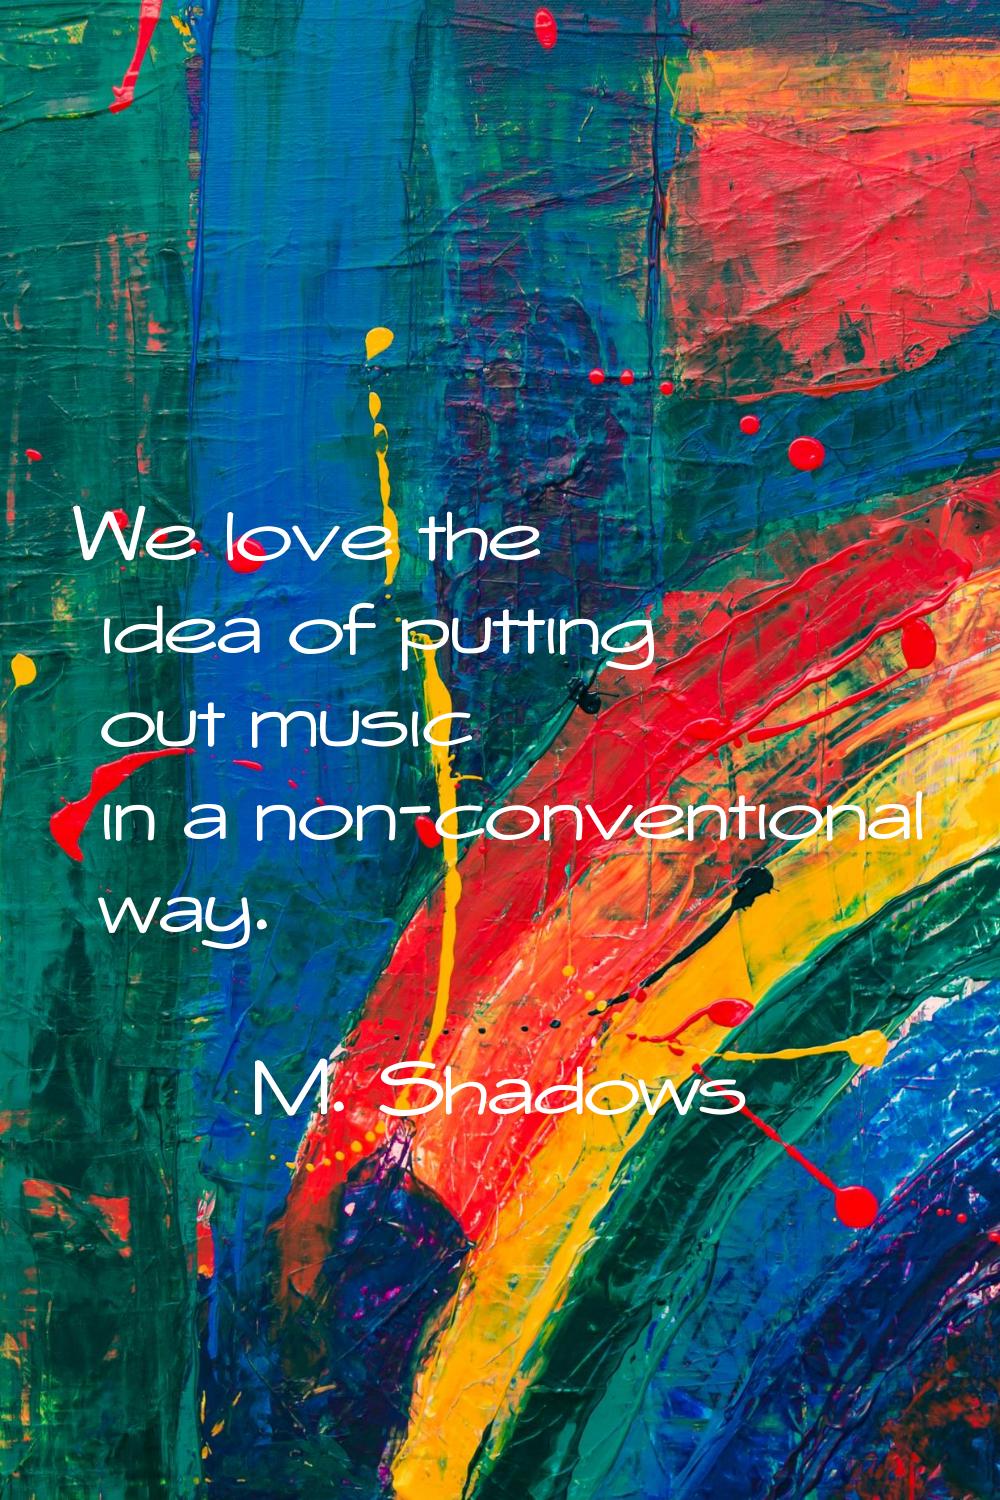 We love the idea of putting out music in a non-conventional way.